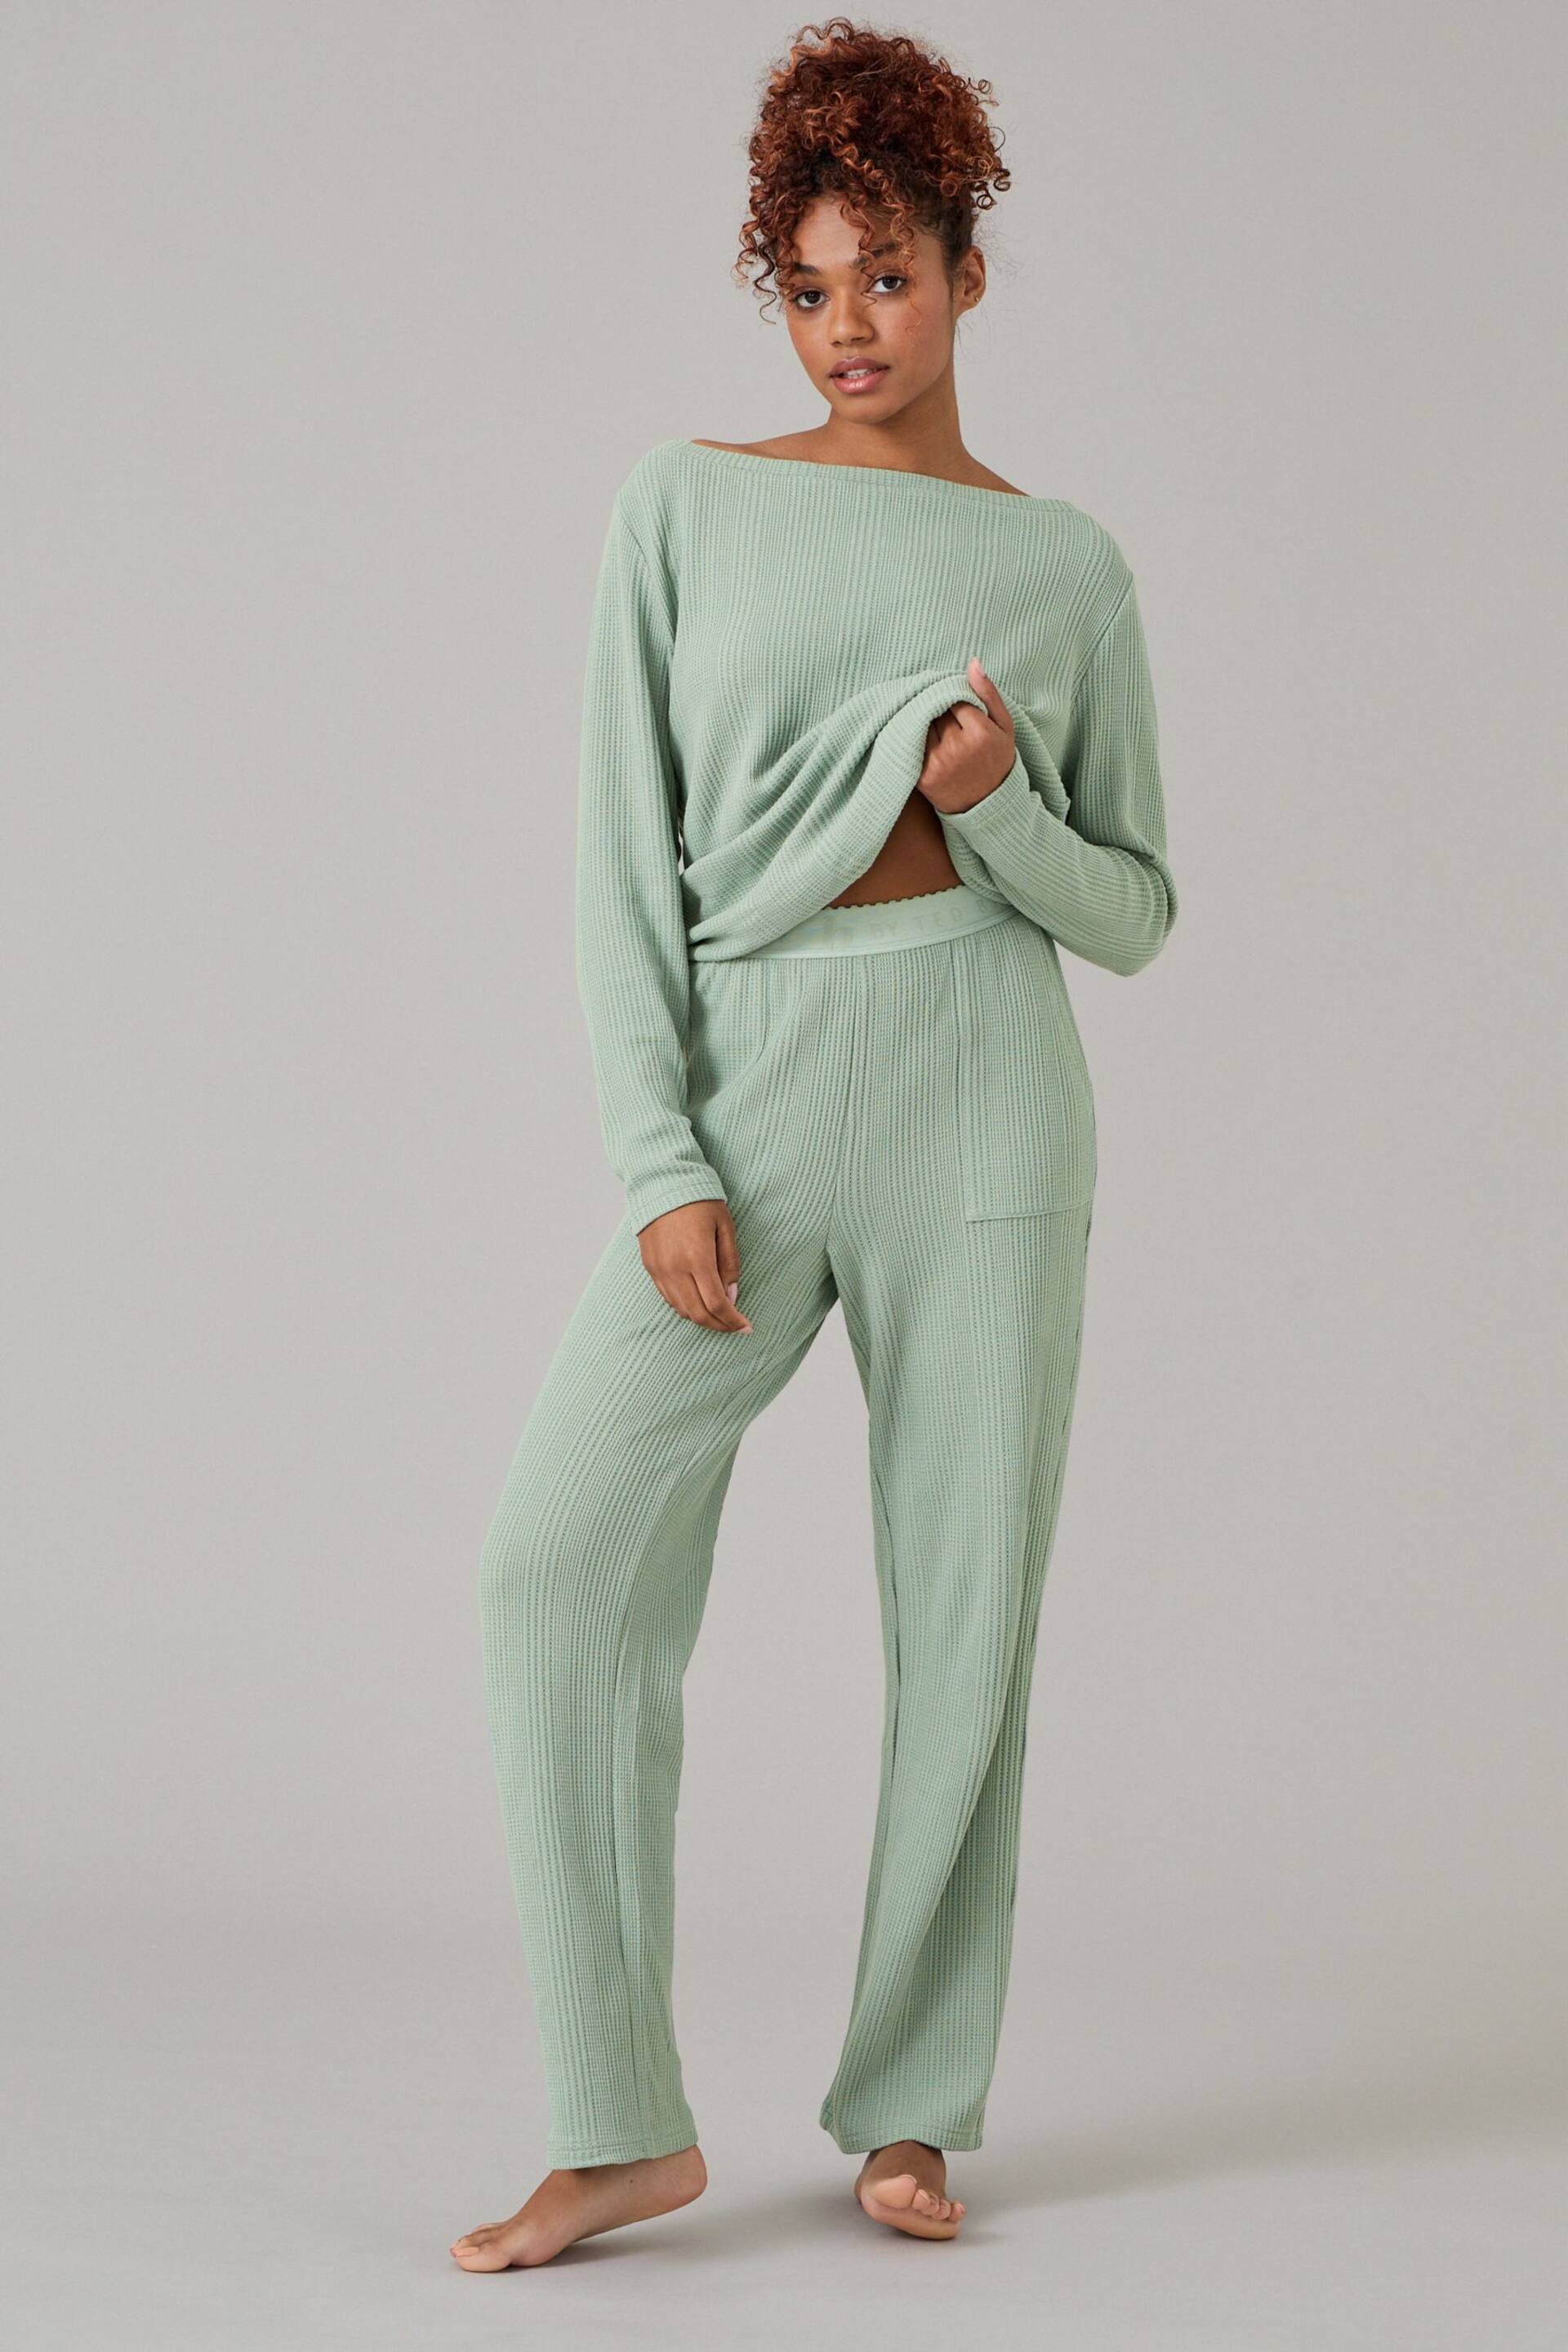 B by Ted Baker Waffle Lounge Wide Leg Trousers - Image 1 of 6